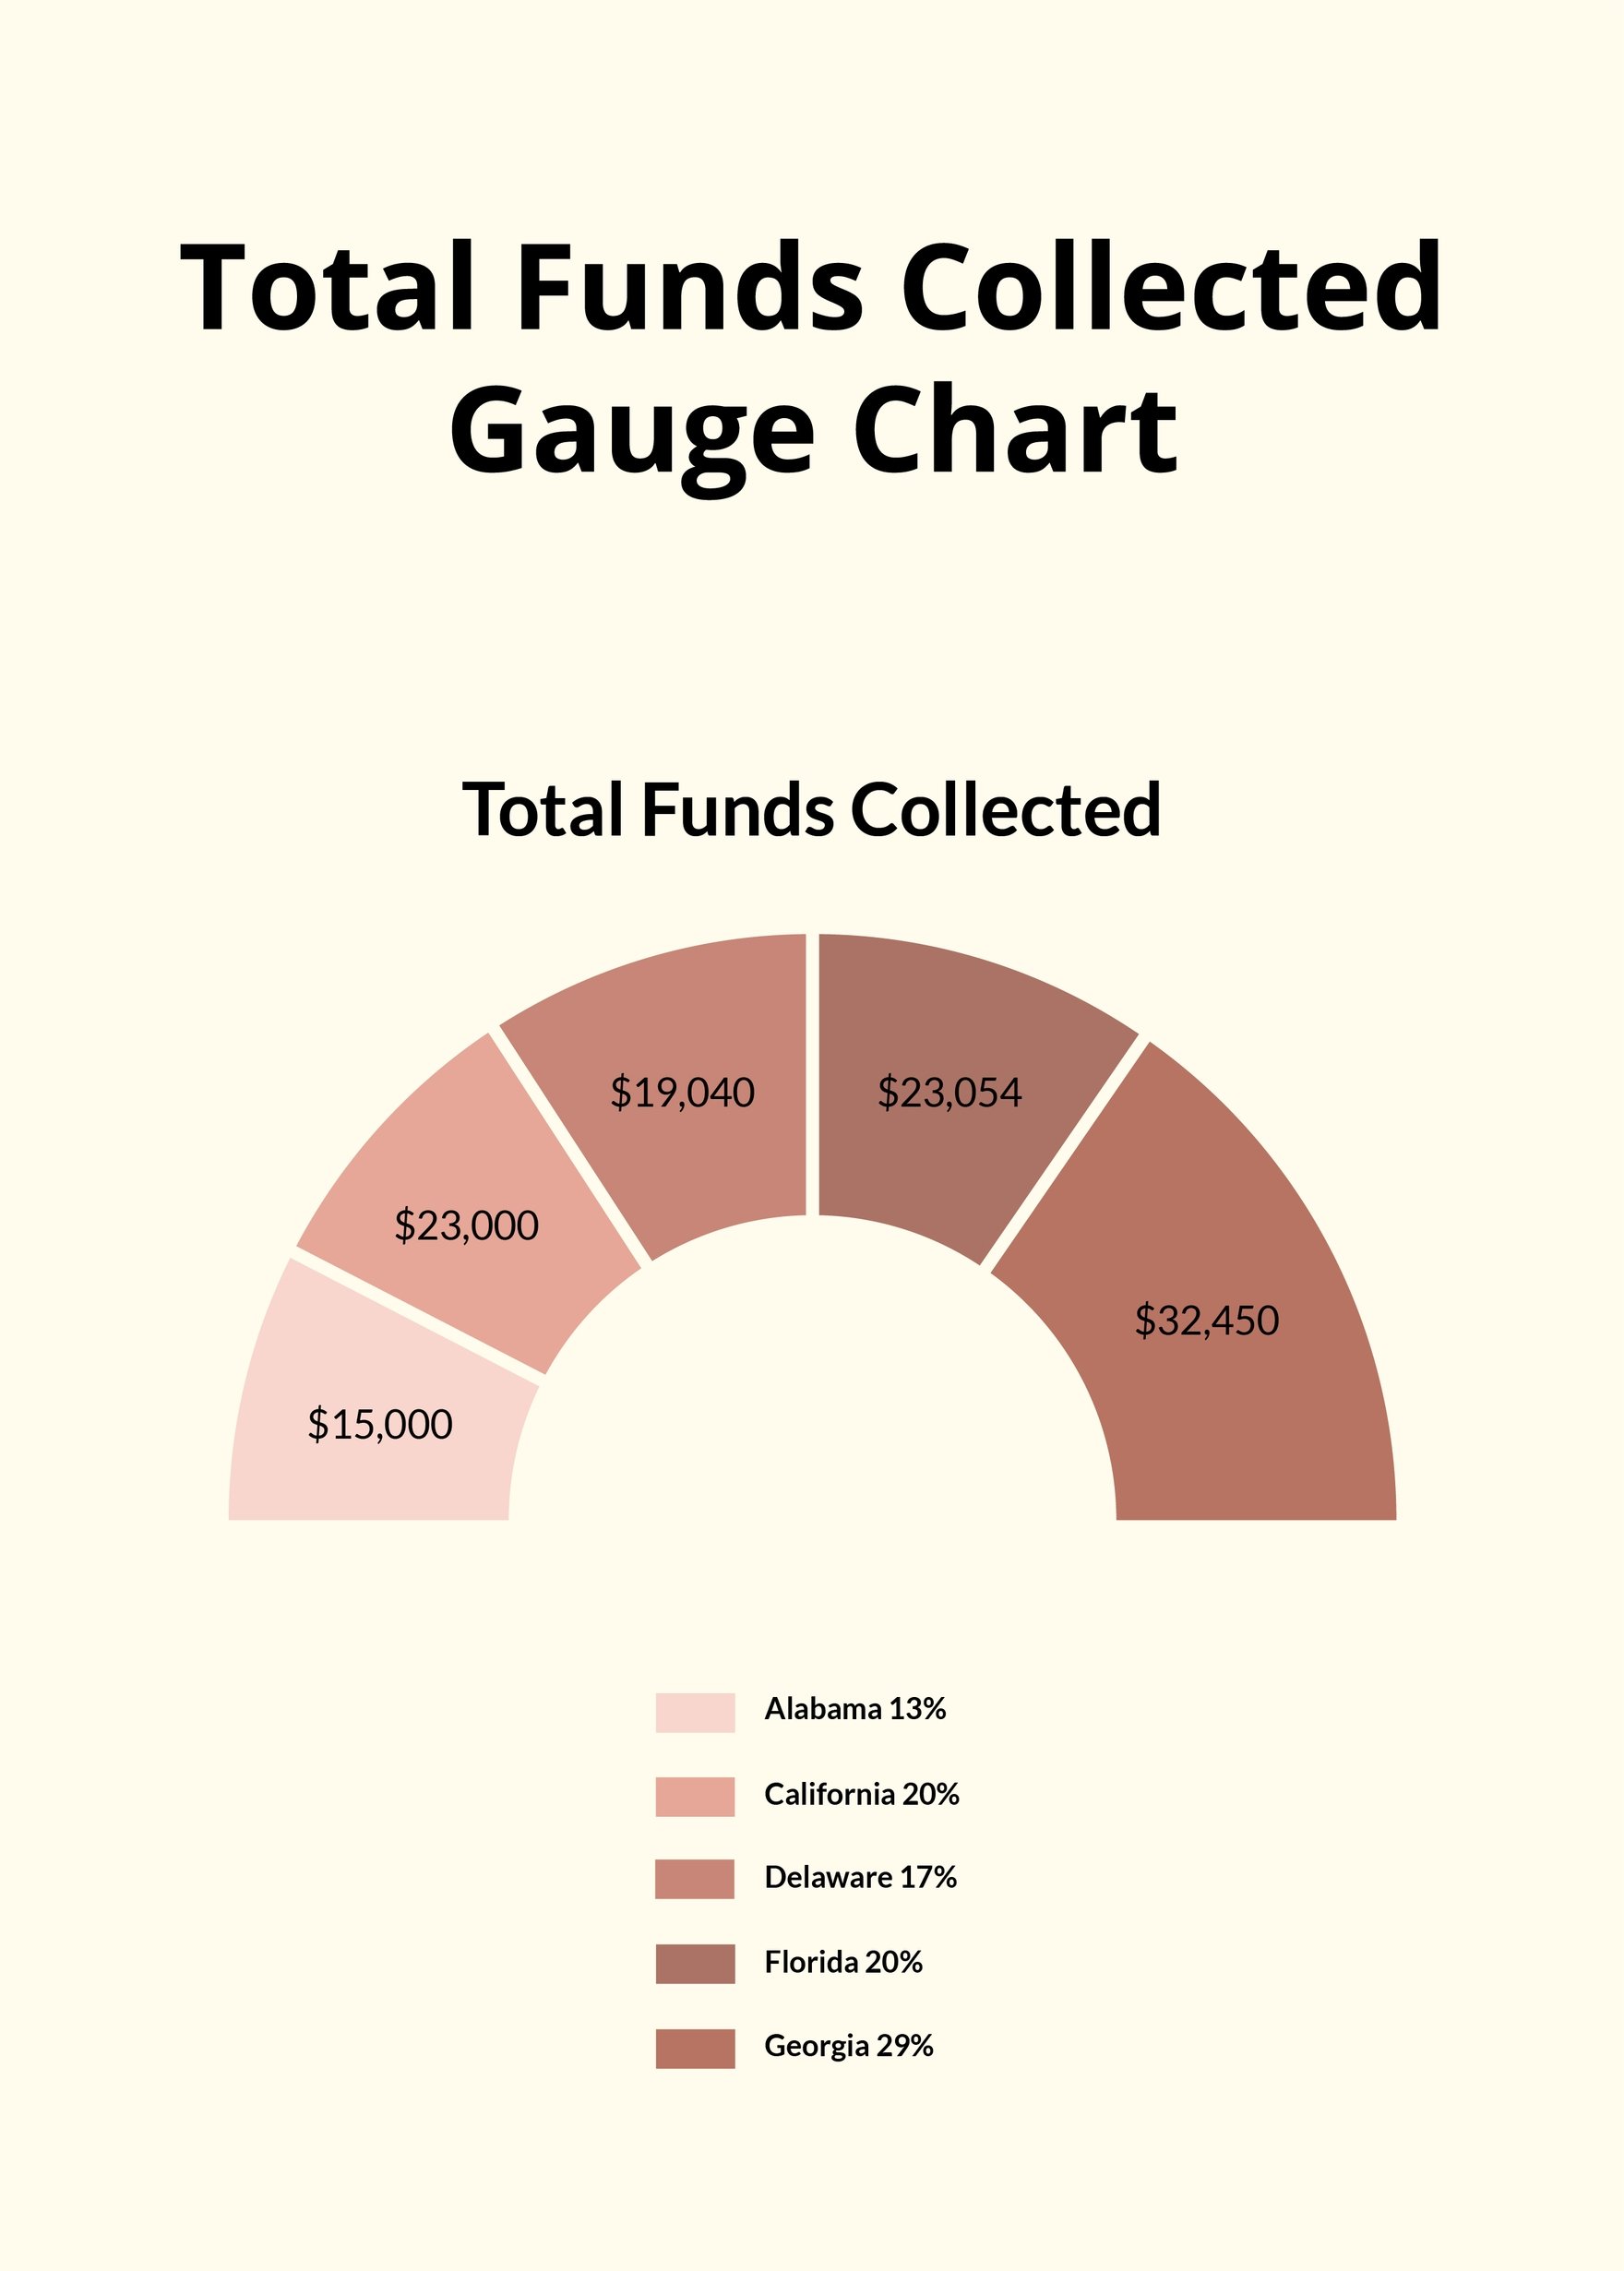 Free Total Funds Collected Gauge Chart in PDF, Illustrator